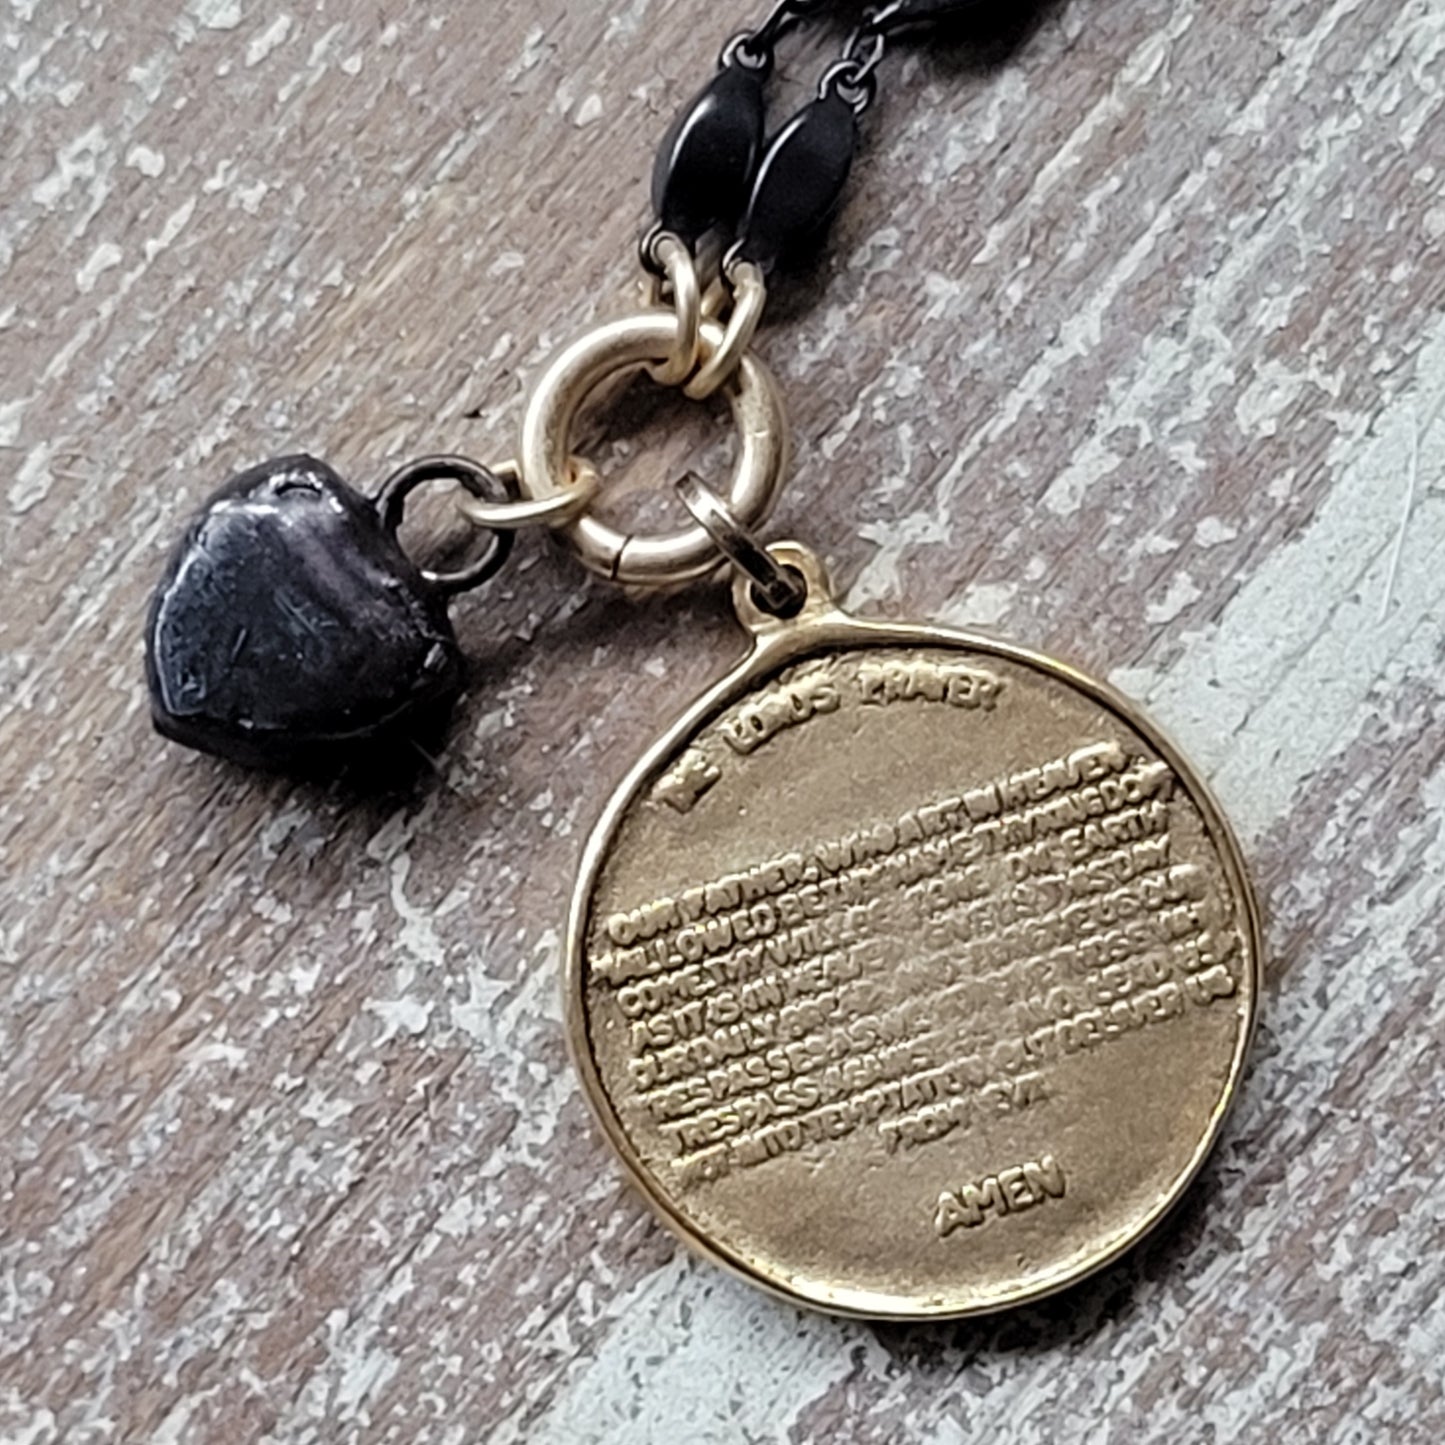 Lord's Prayer Necklace, rustic Boho chic medallion necklace, mixed metal necklace, heart charm, rustic style